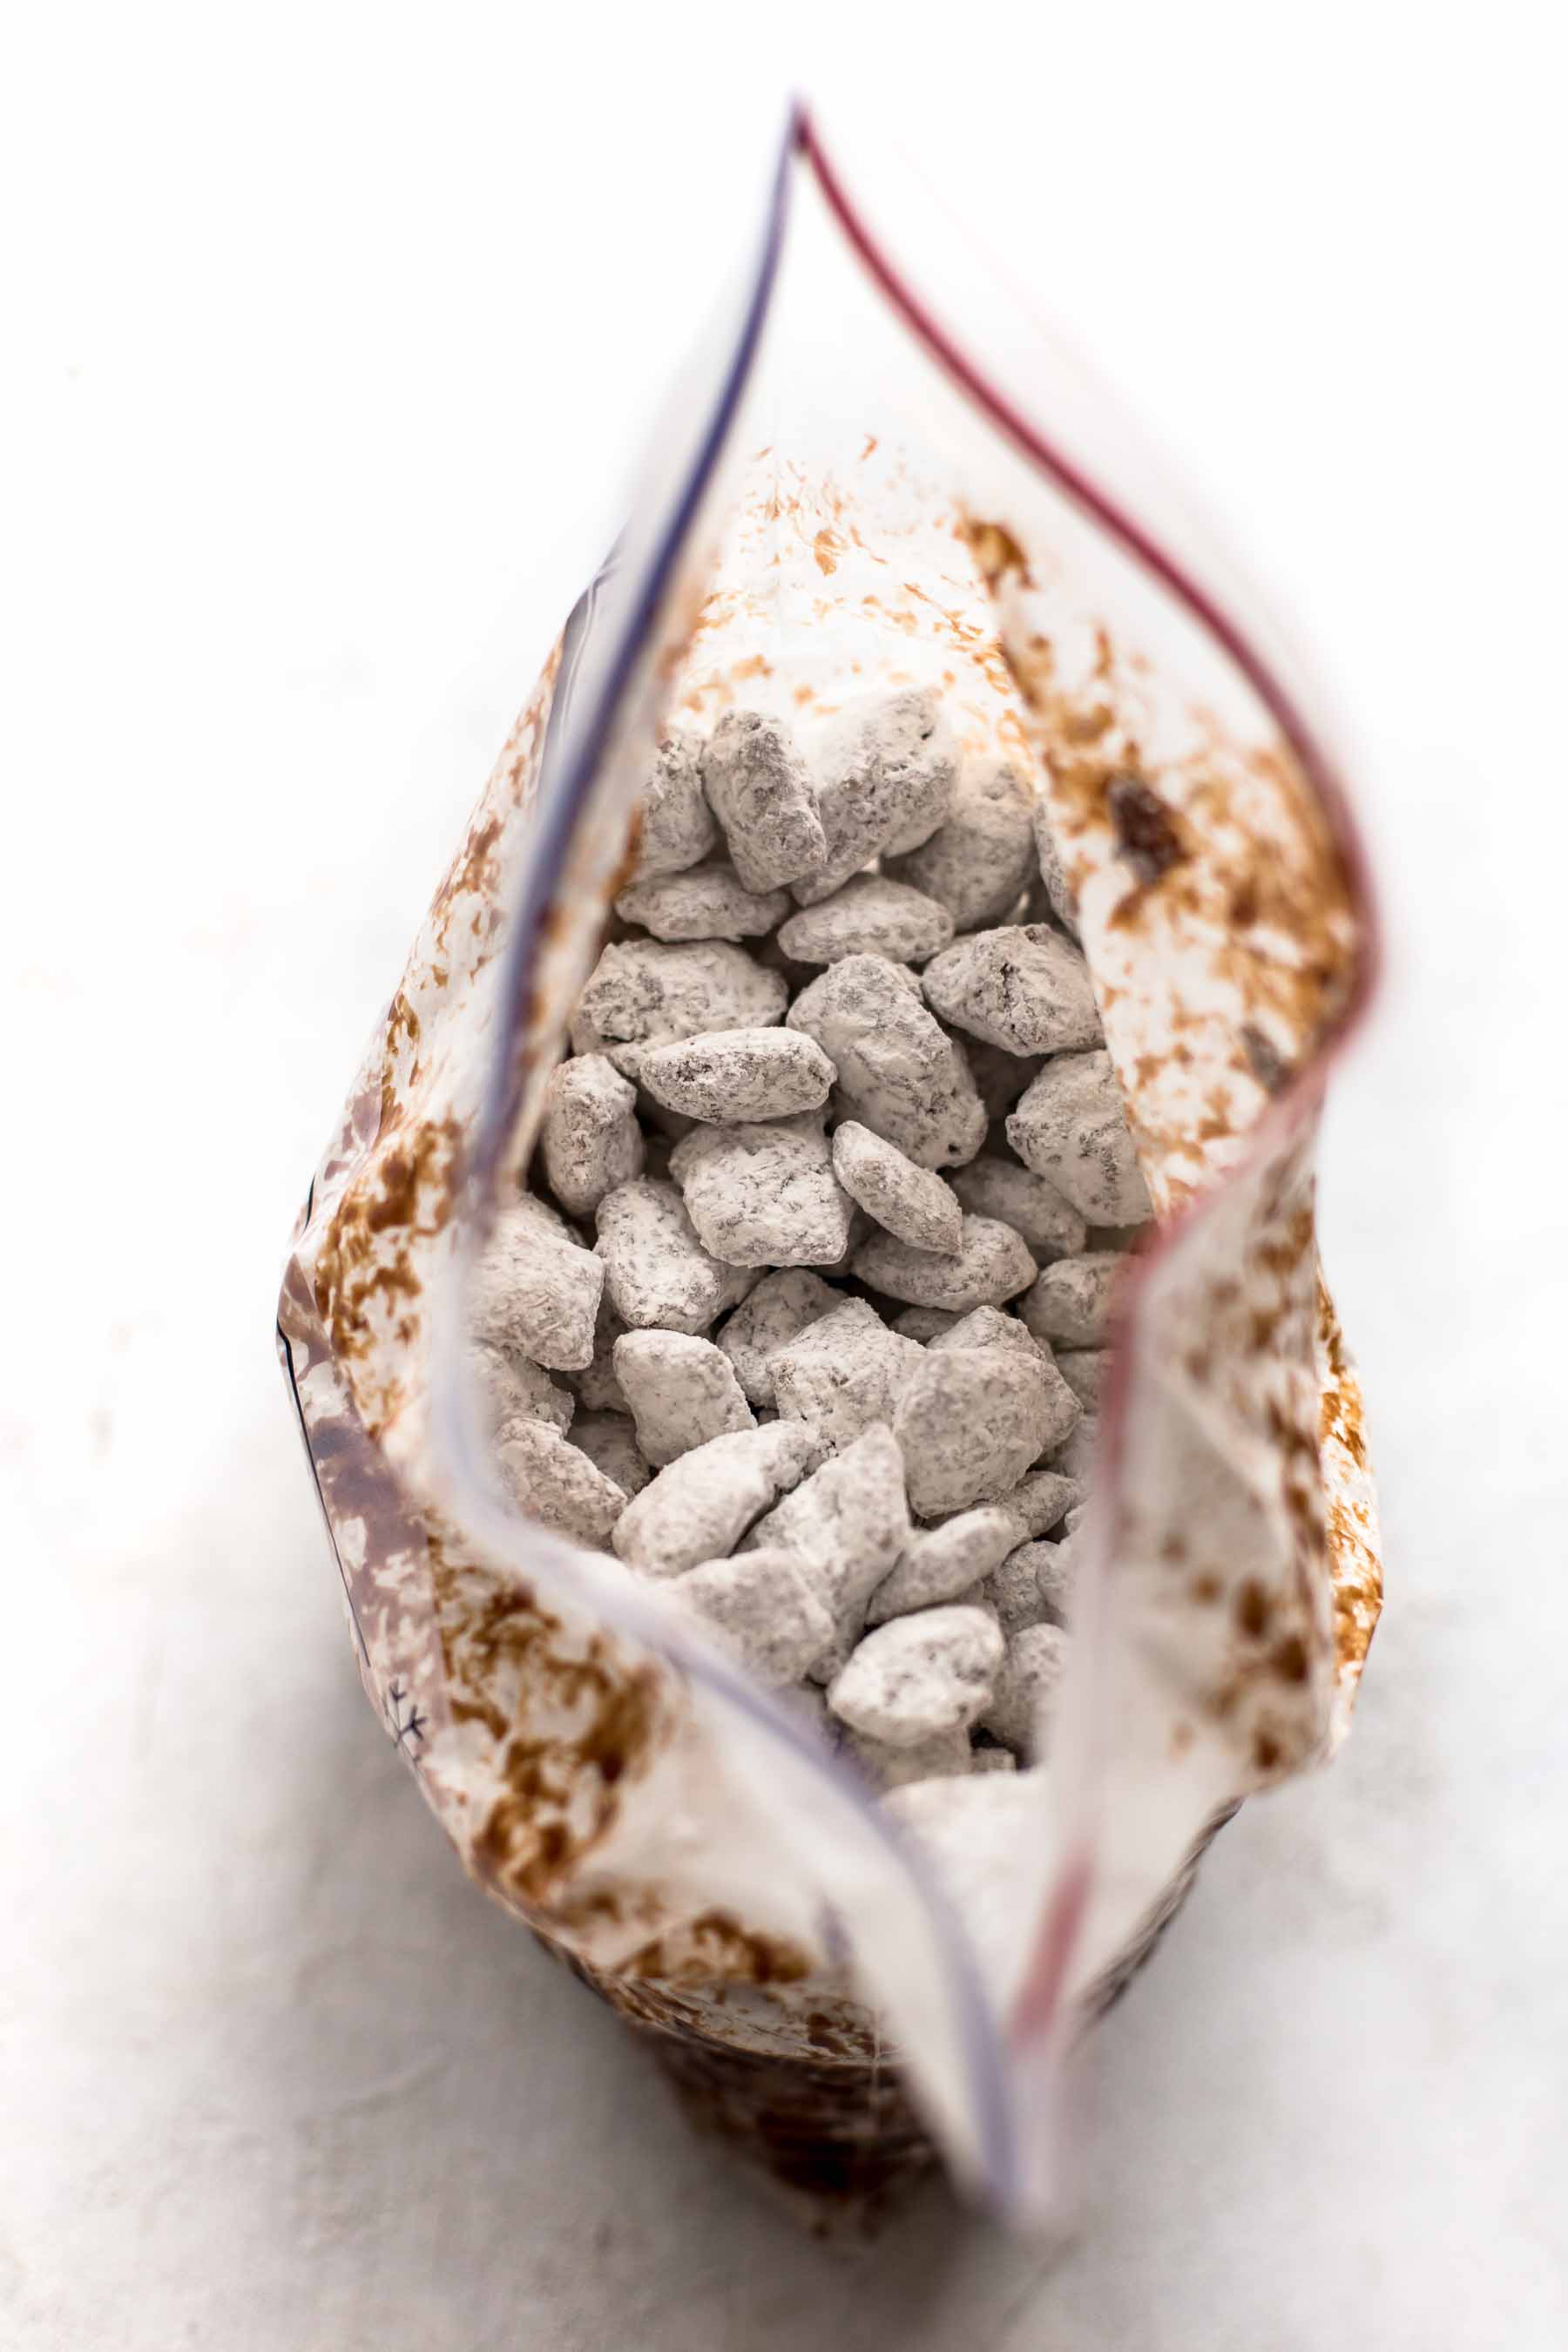 powdered sugar coated chex cereal (puppy chow) in a ziploc bag